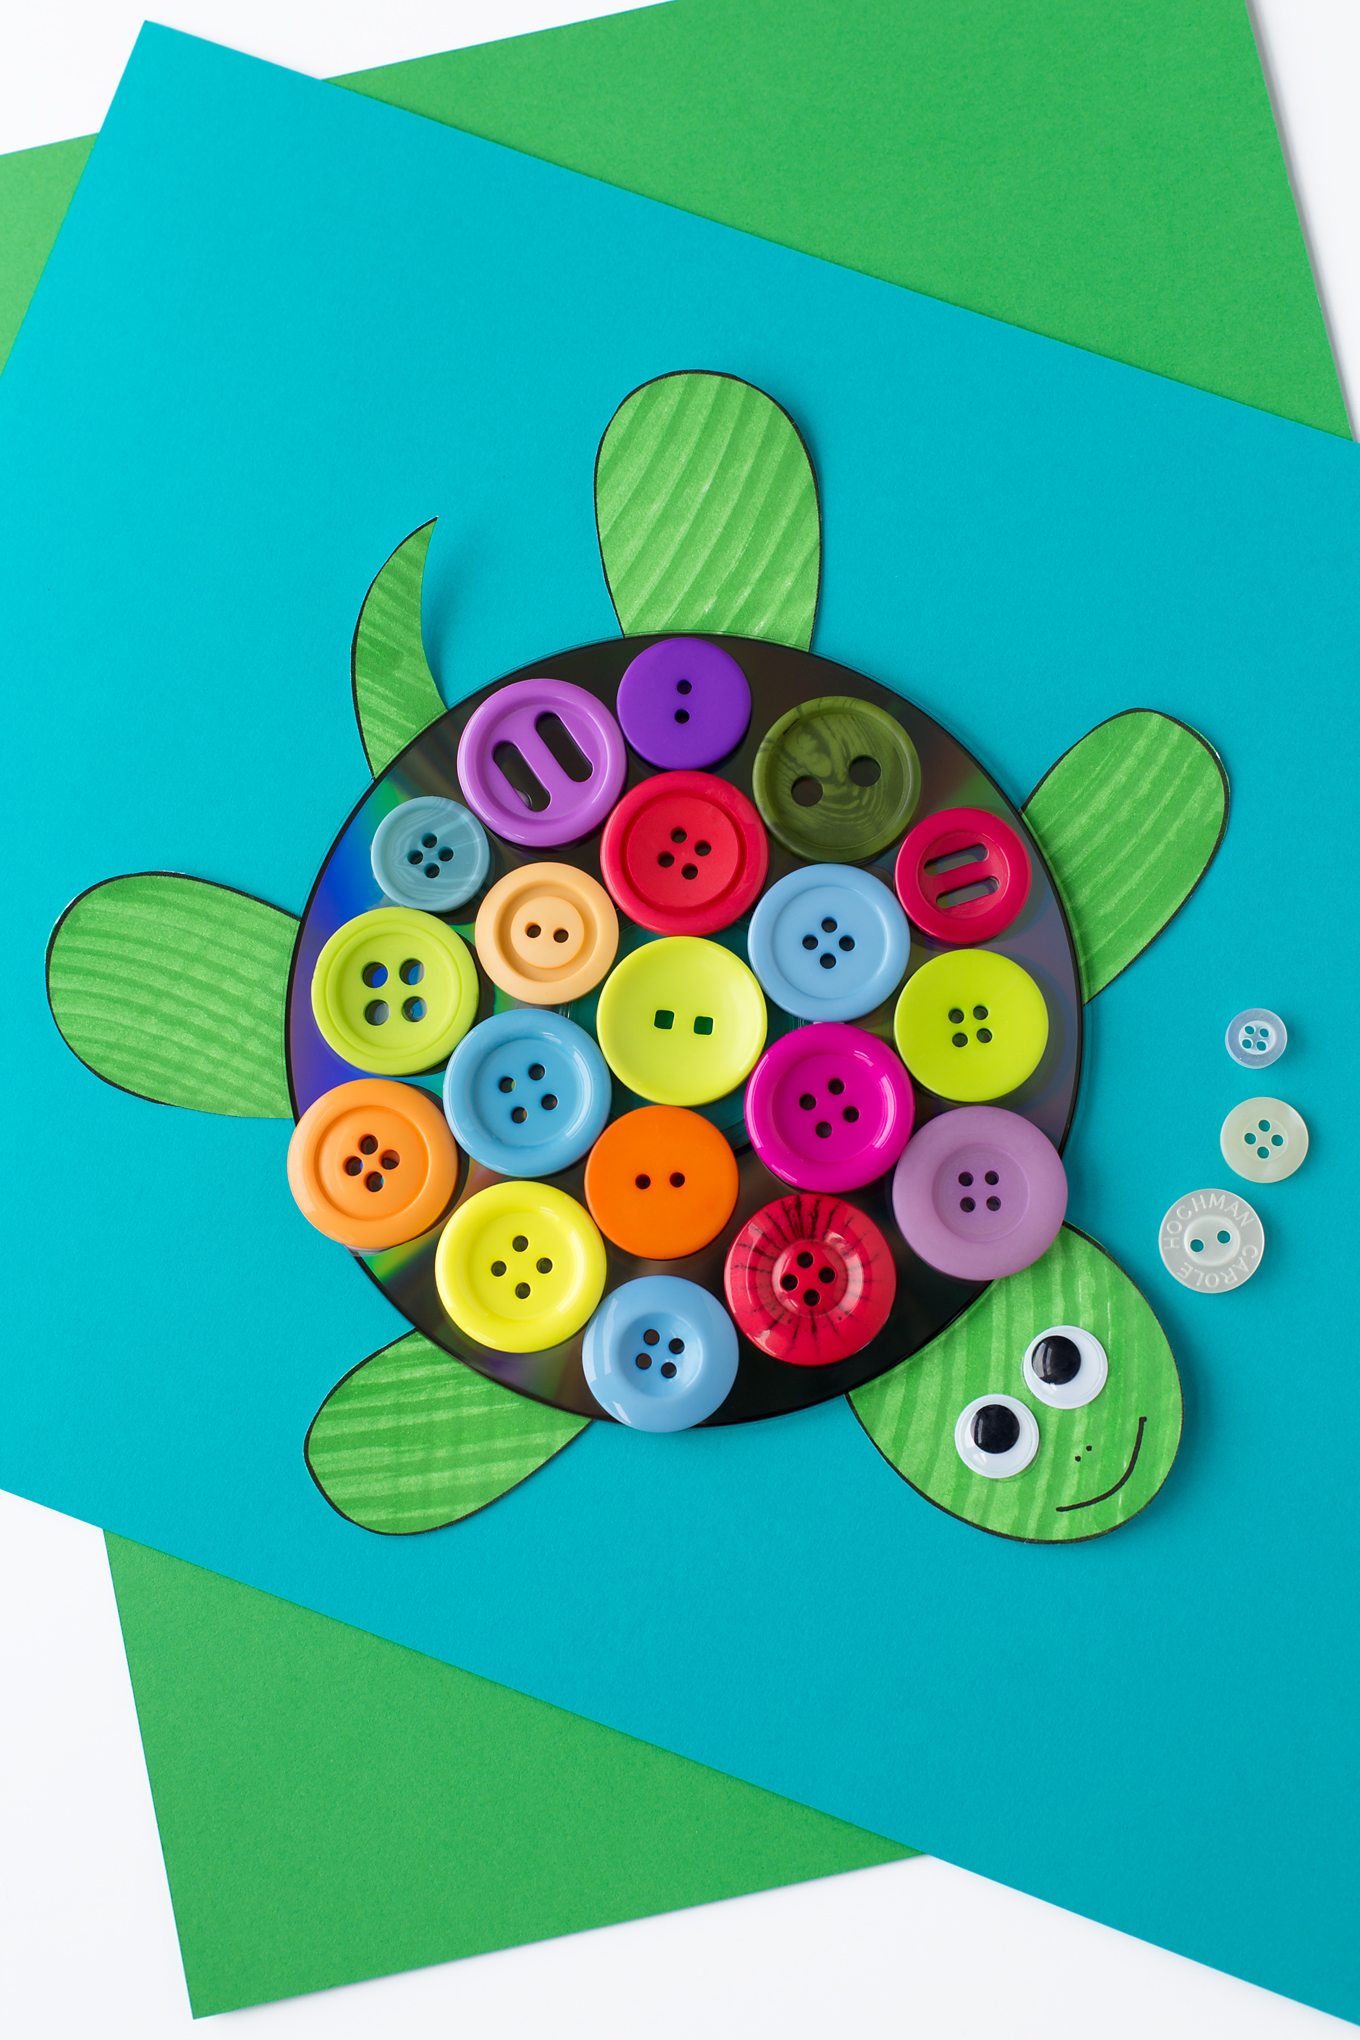 adorable-button-turtle-a-preschool-nursery-project-for-kids-truly